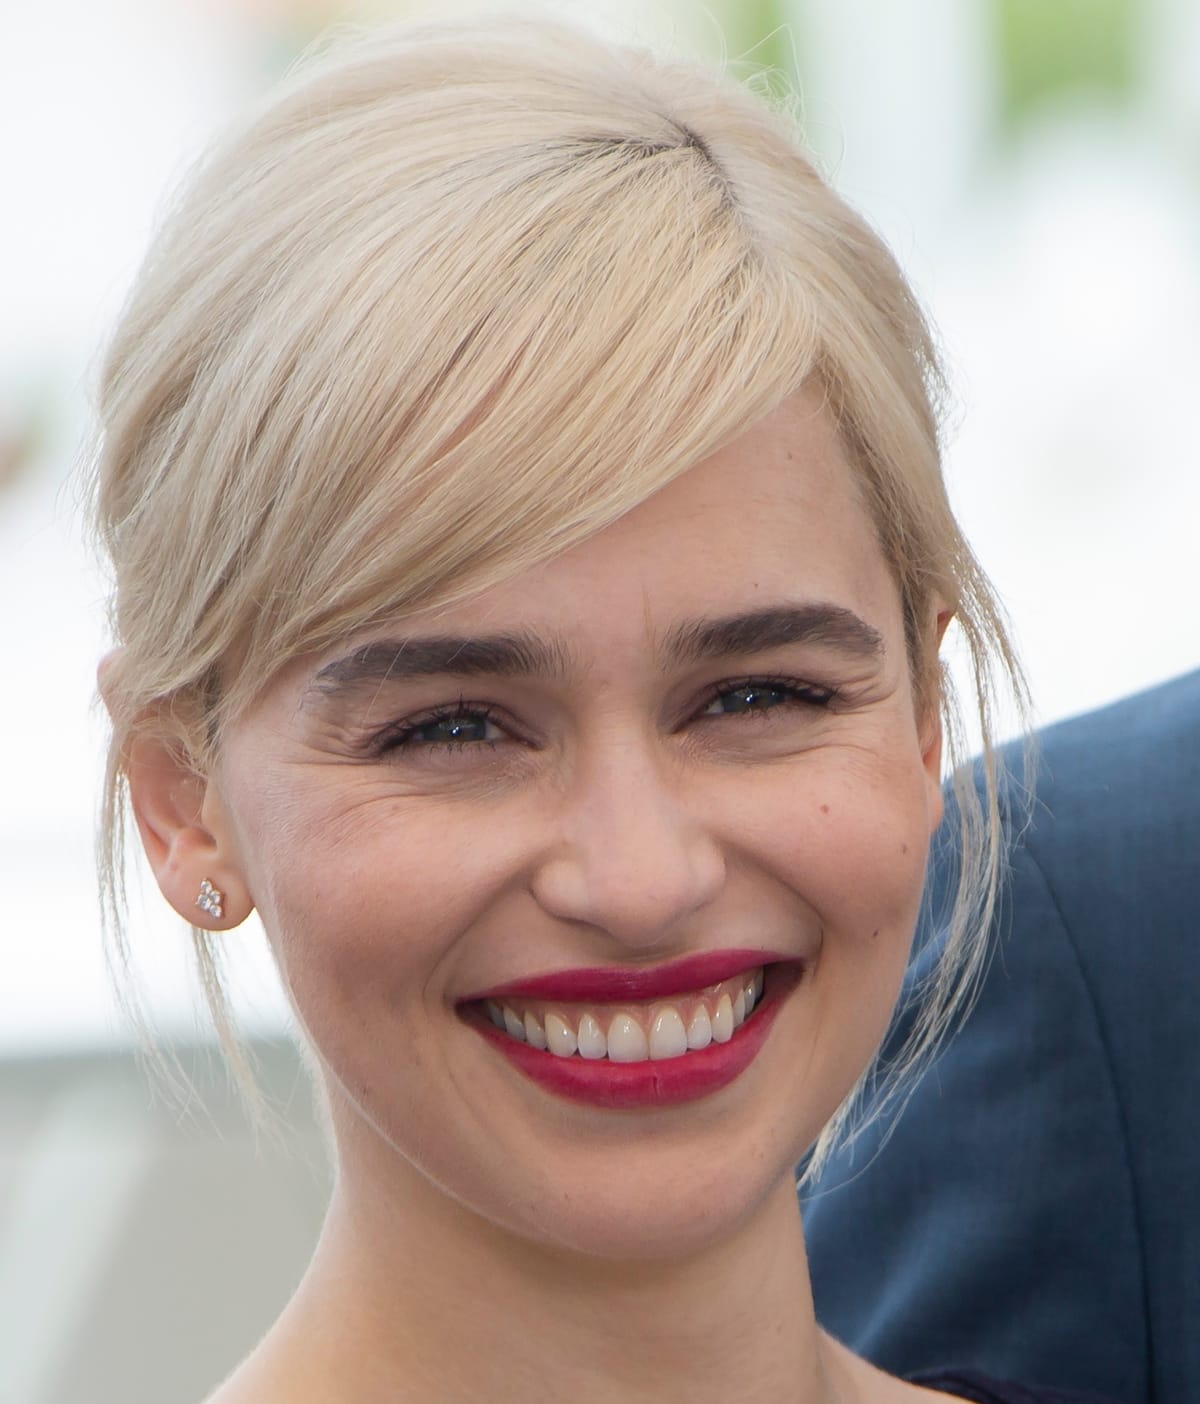 Actress Emilia Clarke has become famous for her extremely expressive eyebrows